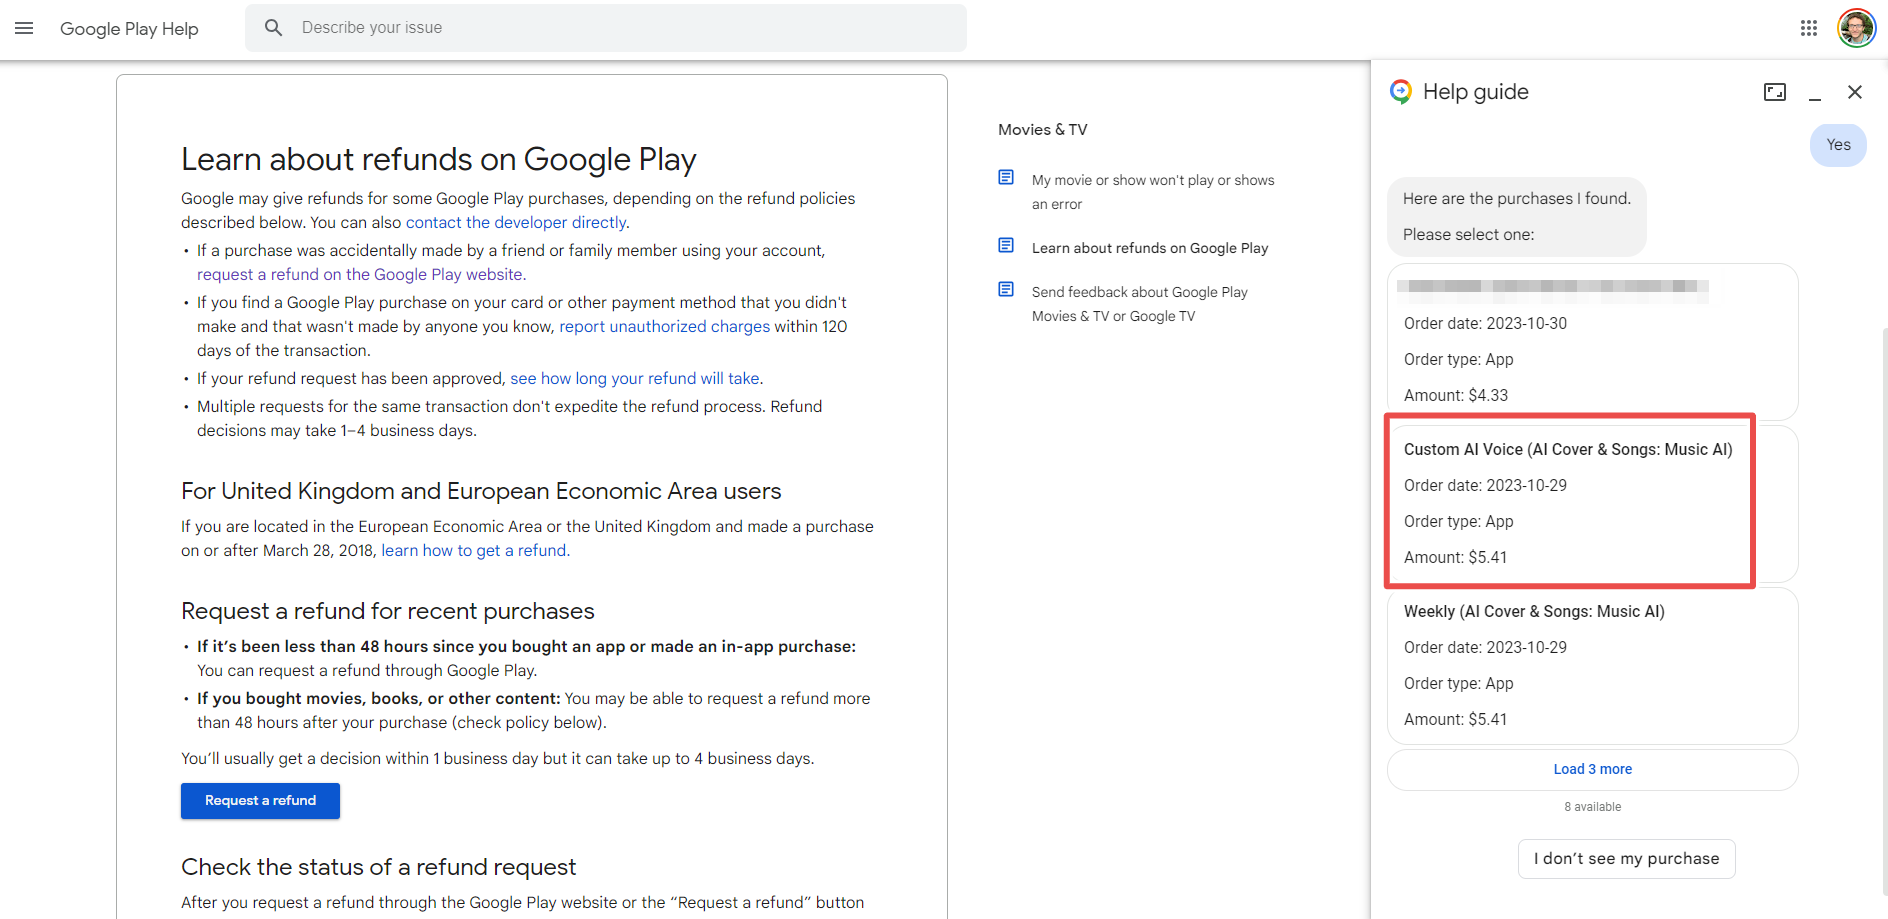 Google Play refund conversation with a recent purchase highlighted